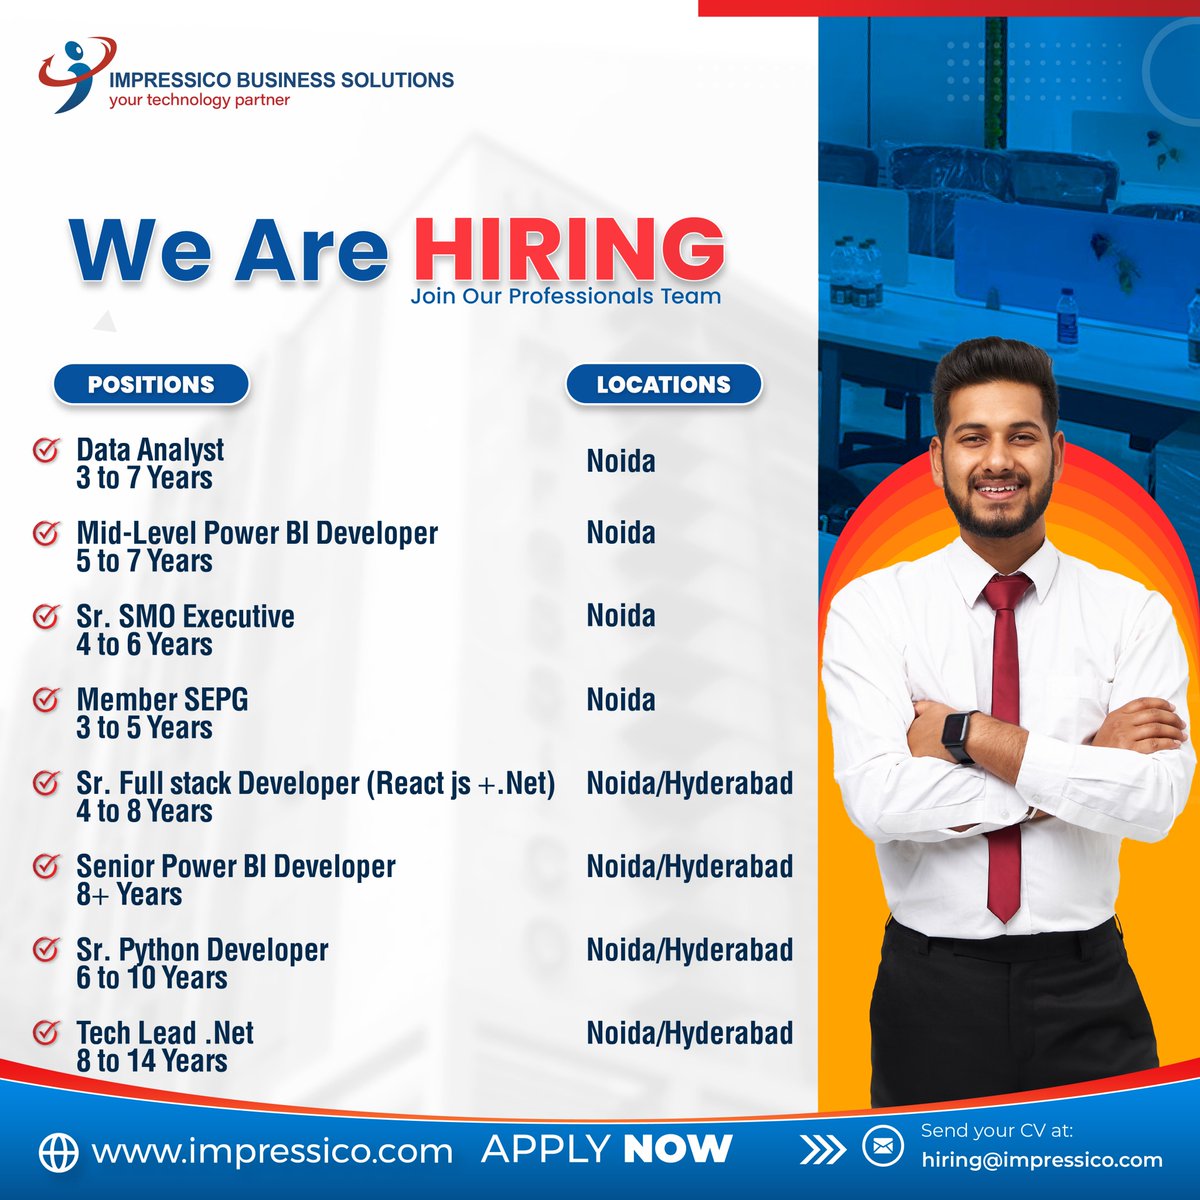 Great opportunity! We are hiring experienced professionals for various positions, as mentioned. Visit the website for a detailed job description: impressico.com Interested candidates can share CV at hiring@impressico.com. #jobs #impressico #jobsearch #jobalert #hiring